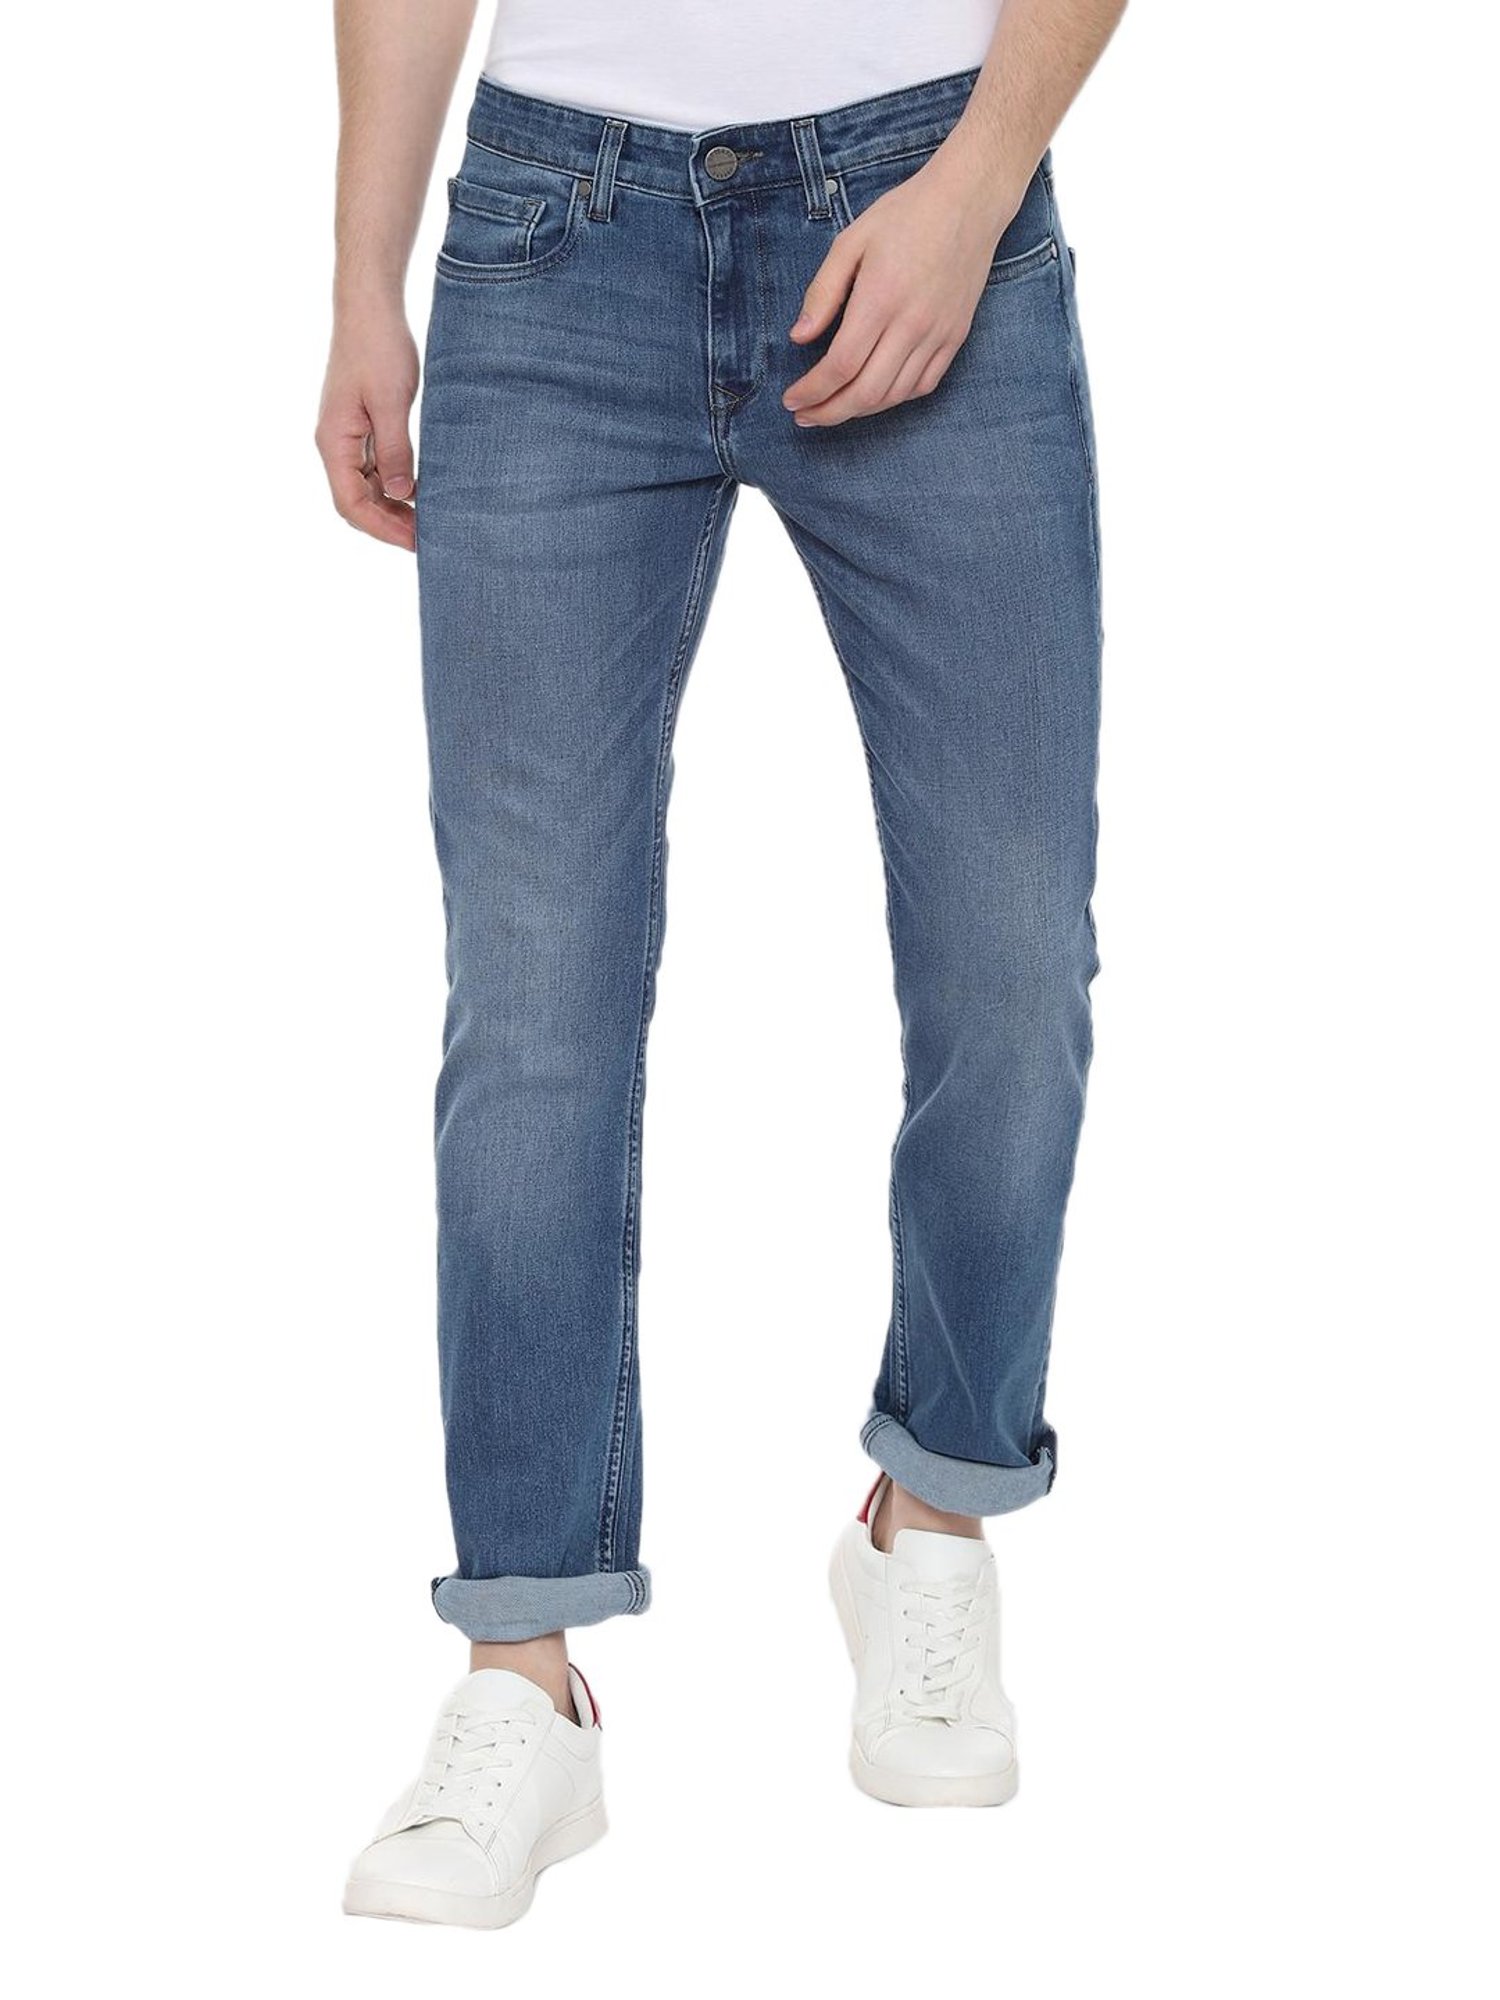 louis philippe jeans price